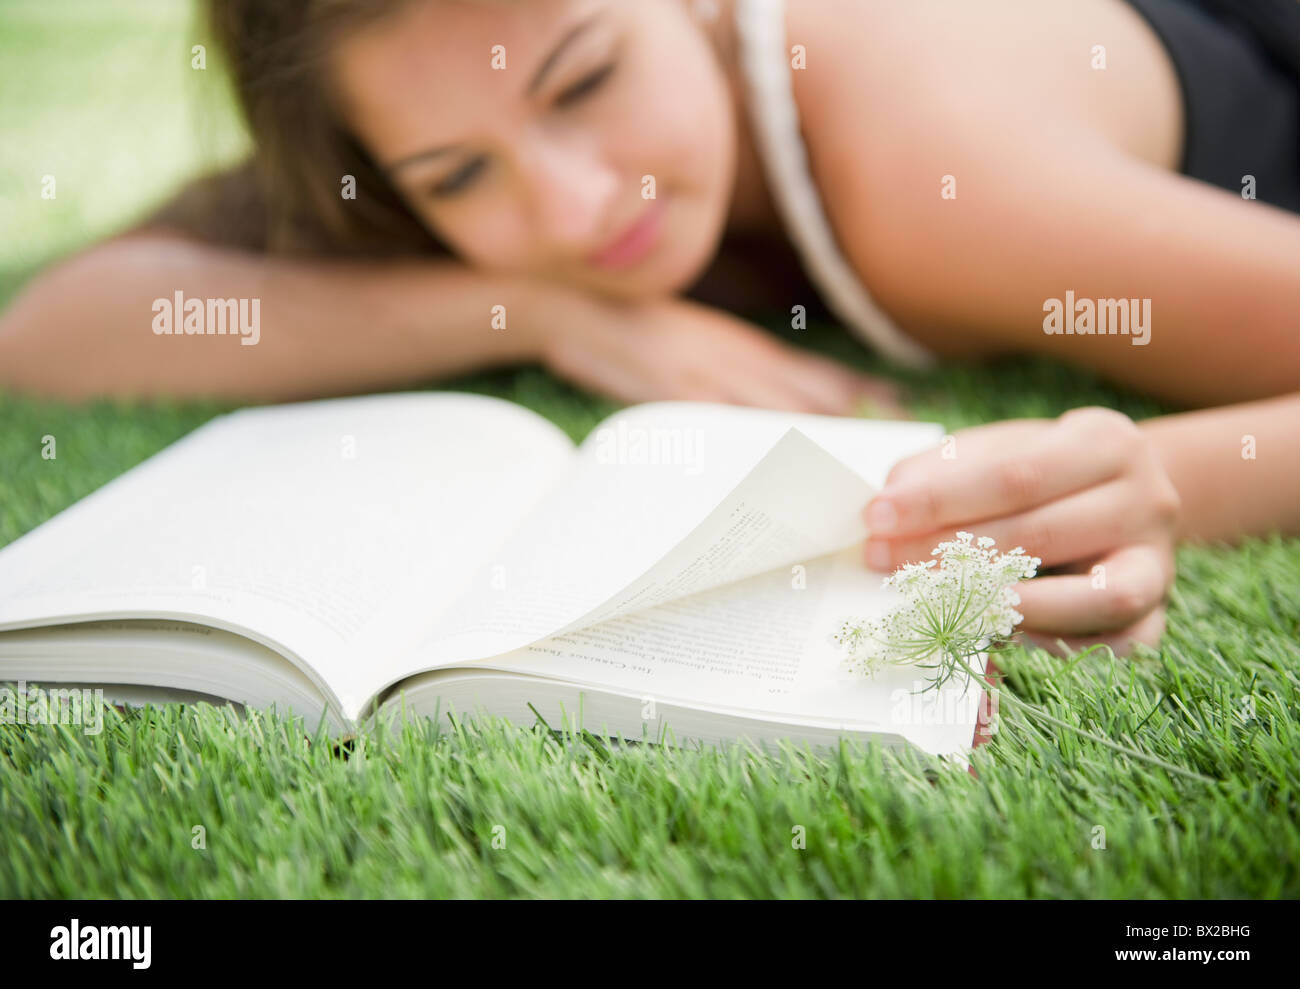 Indian woman laying in grass reading book Stock Photo